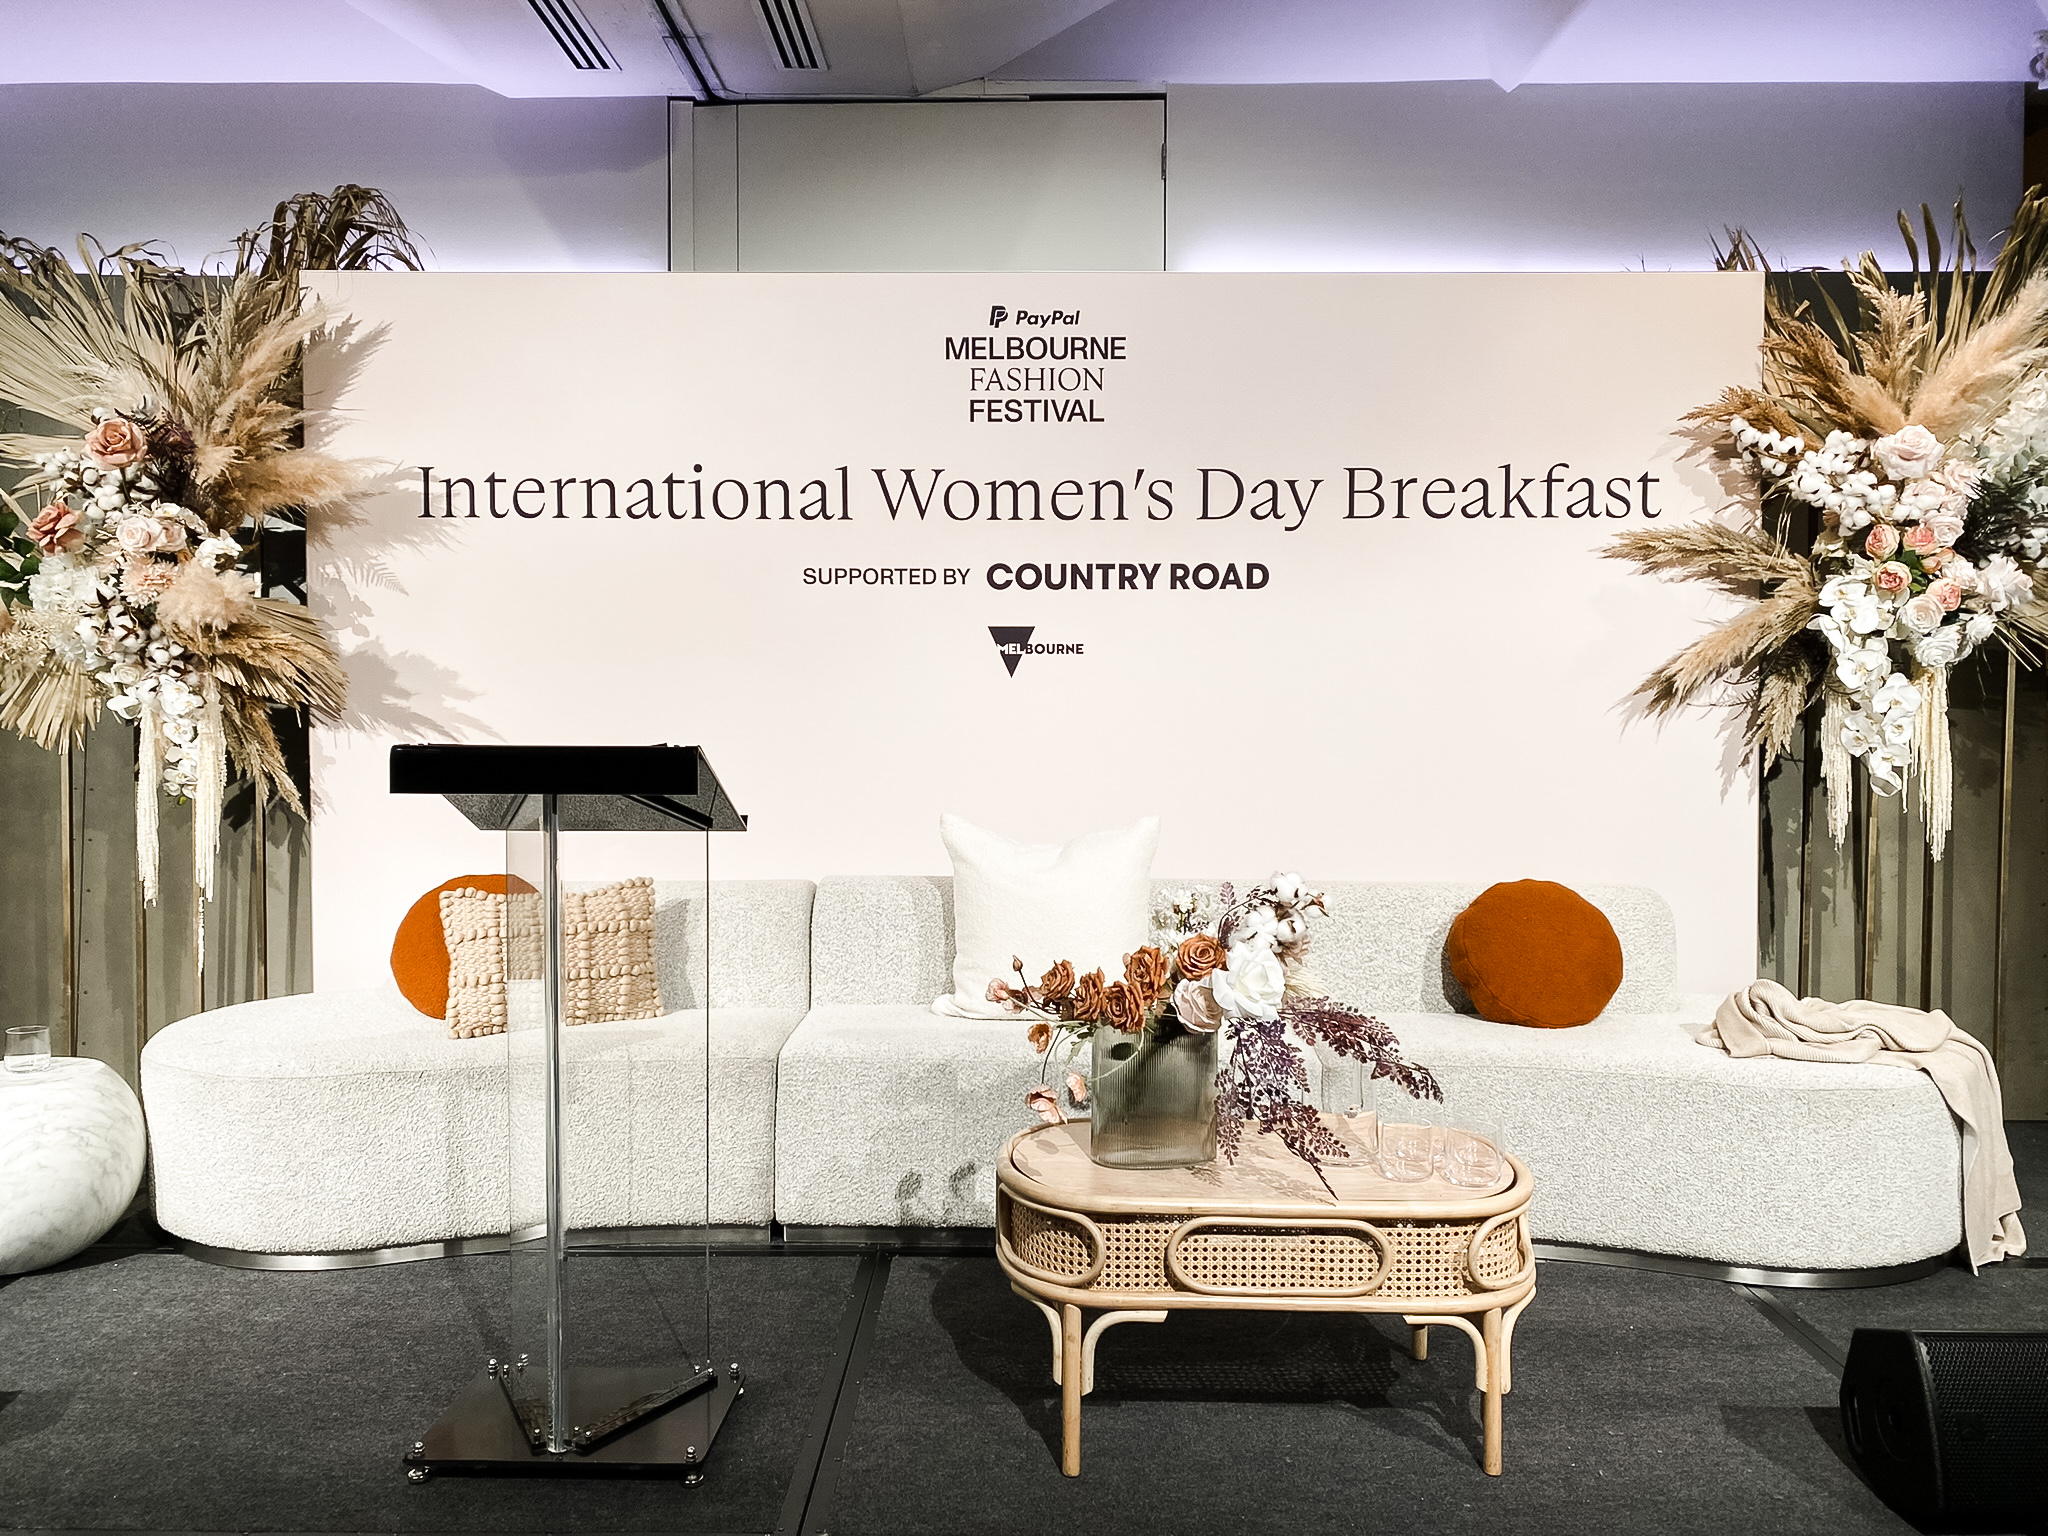 International Women's Day stage set for Melbourne Fashion Festival presented by Country Road, Zinc at Fed Square, Melbourne corporate event venue